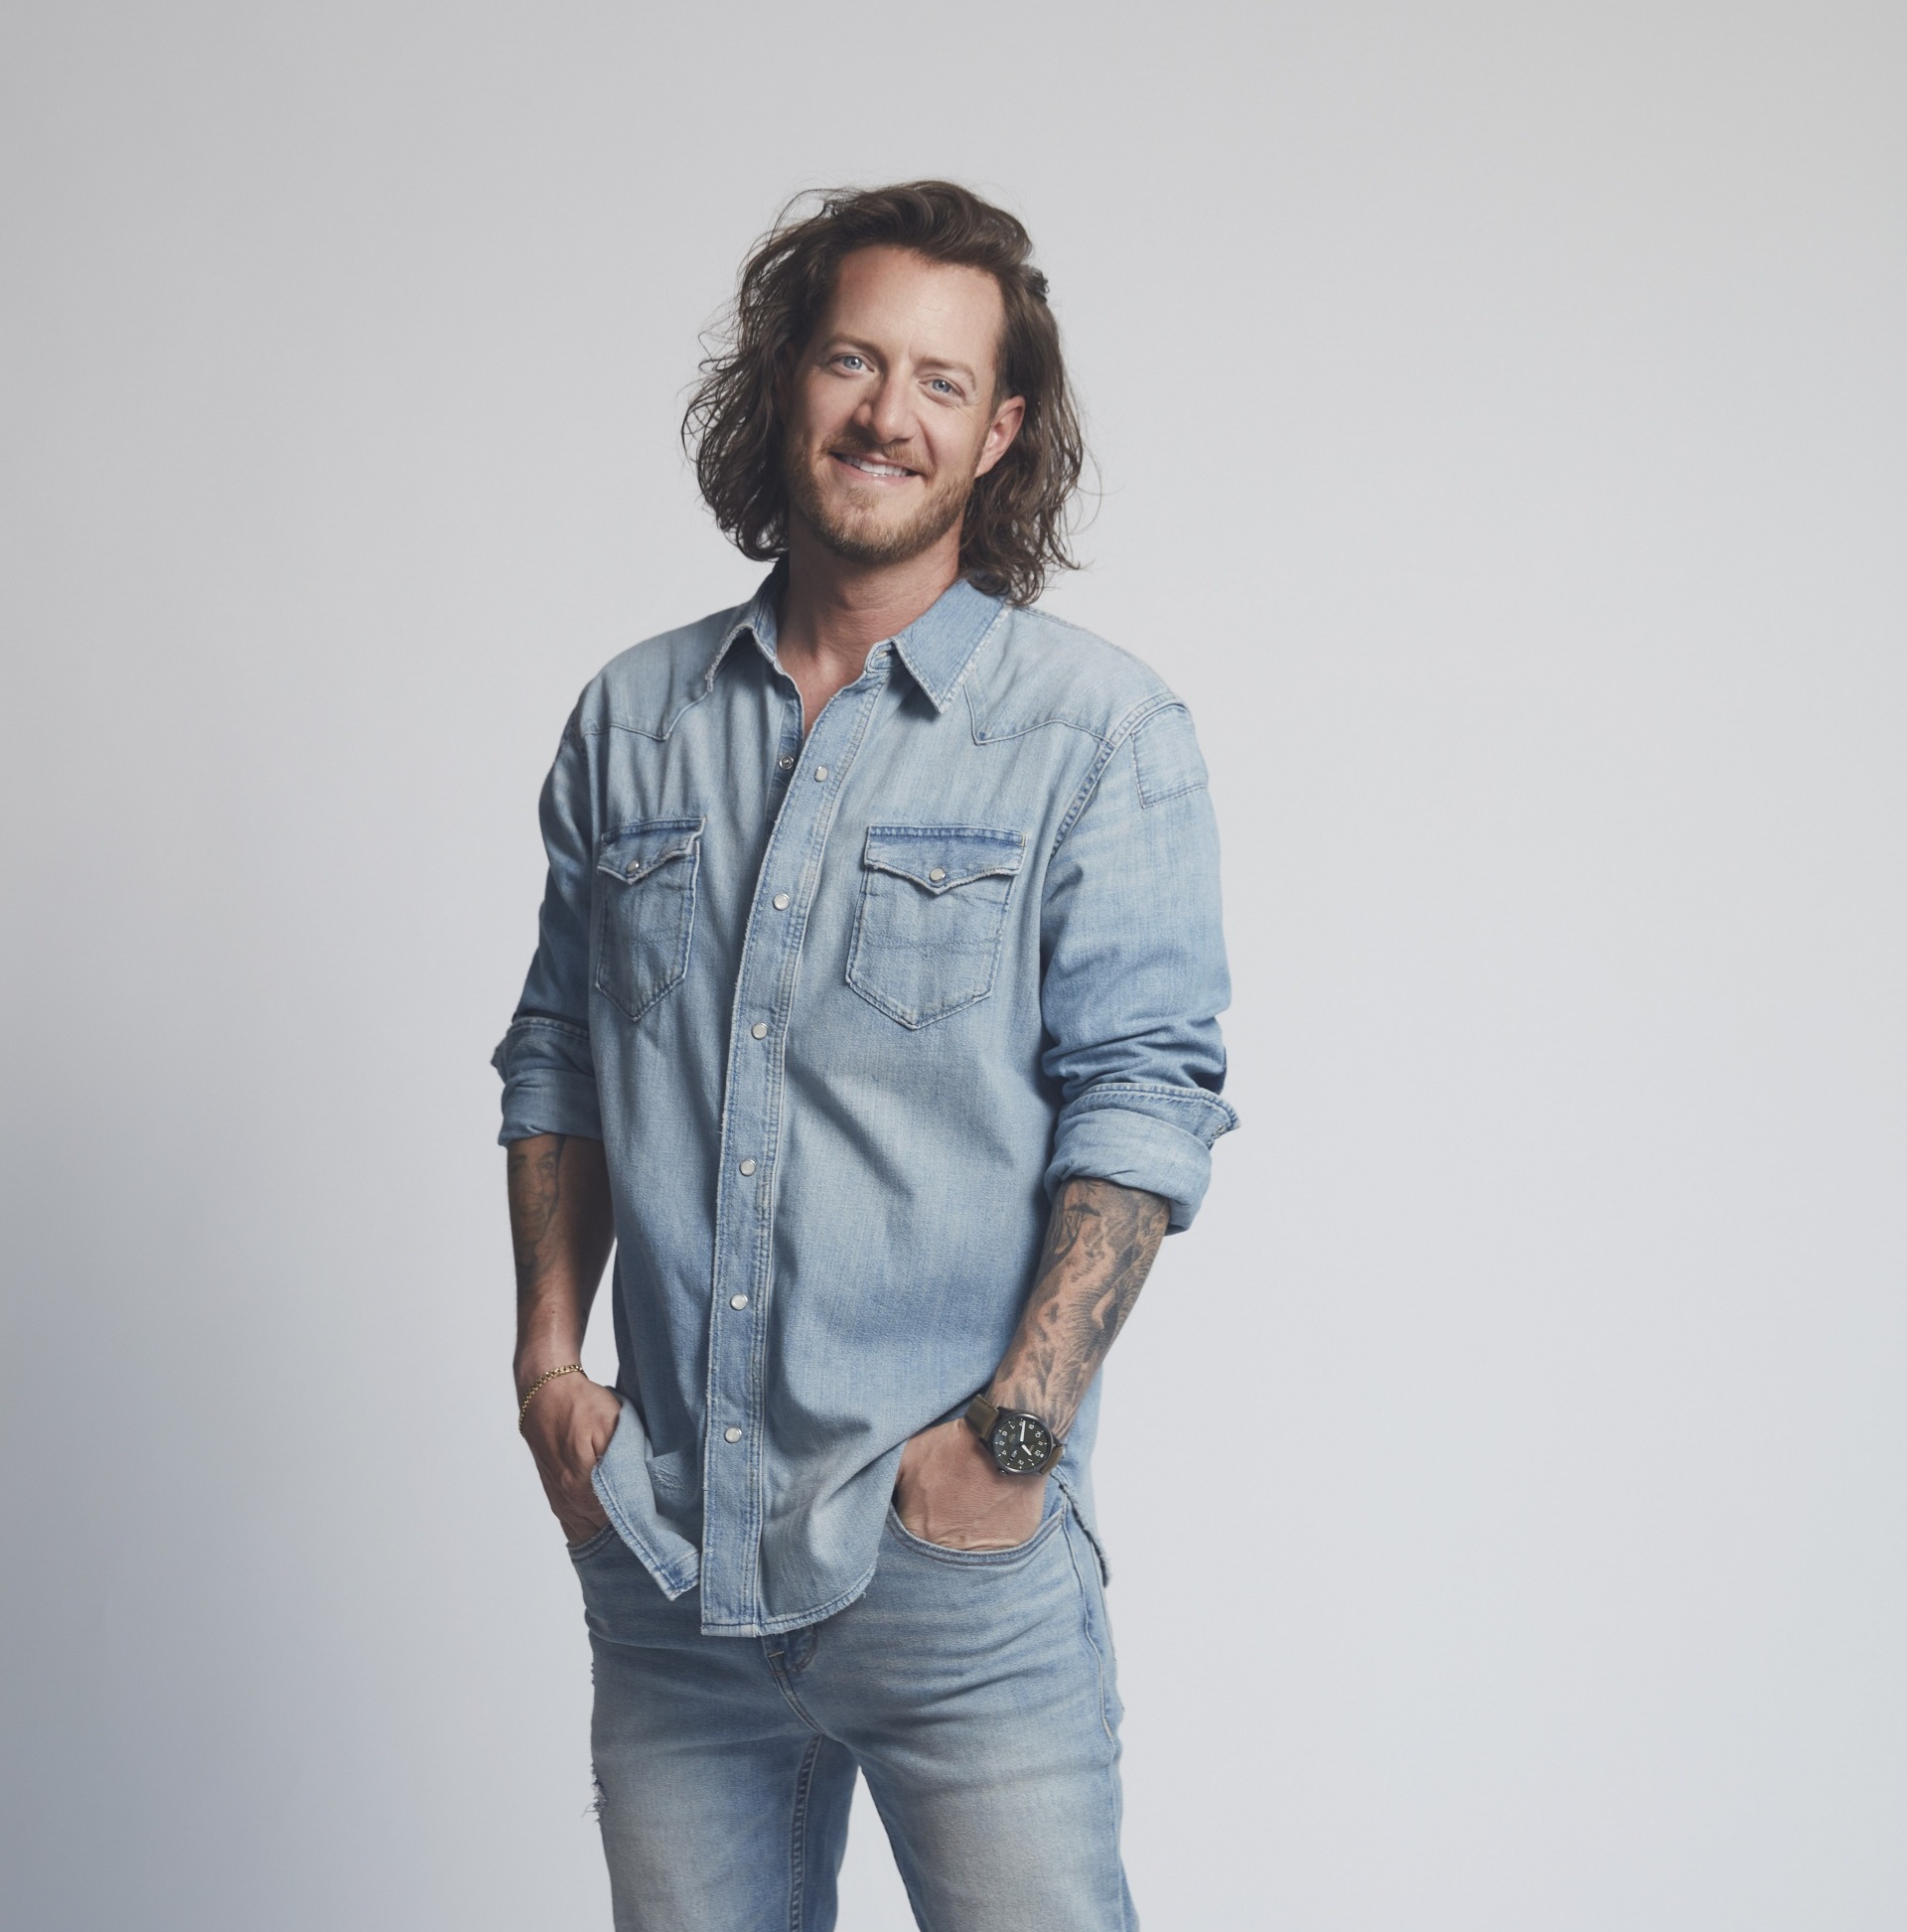 TYLER HUBBARD HITS THE ROAD WITH OLD DOMINION THIS WEEKEND.